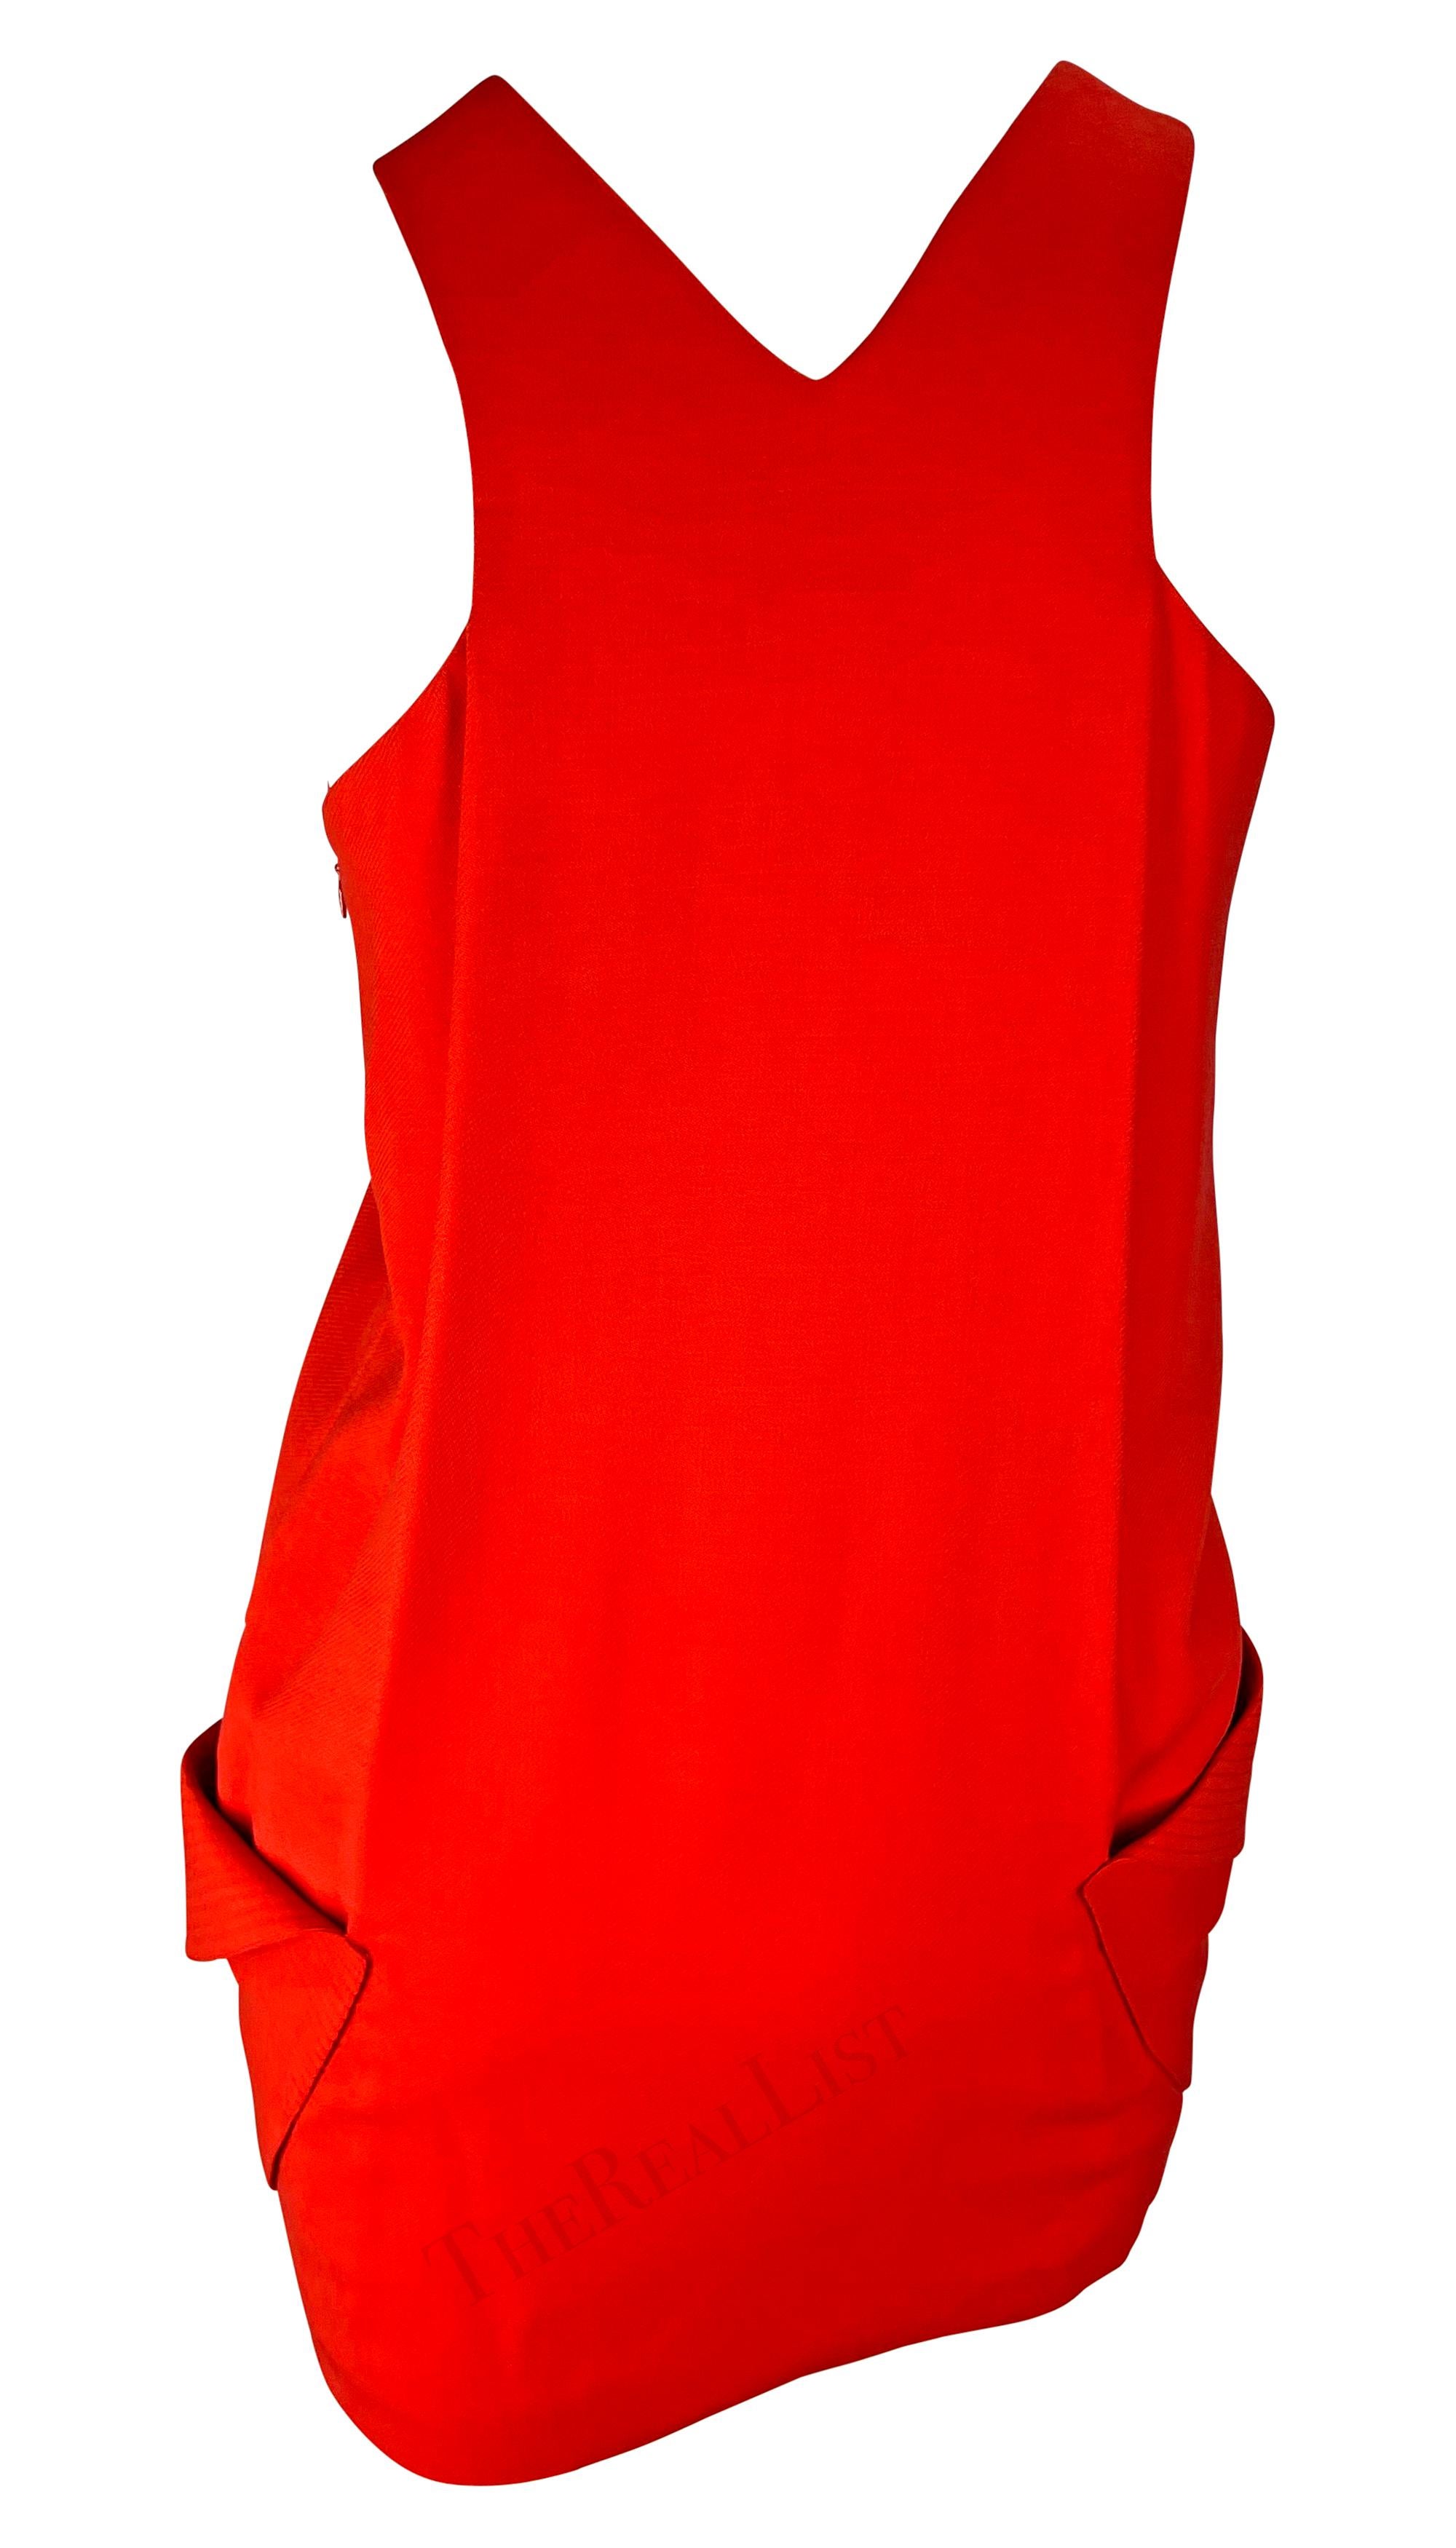 S/S 1991 Gianni Versace Runway Ad Red Sleeveless Pocket Mini Shift Dress For Sale 4